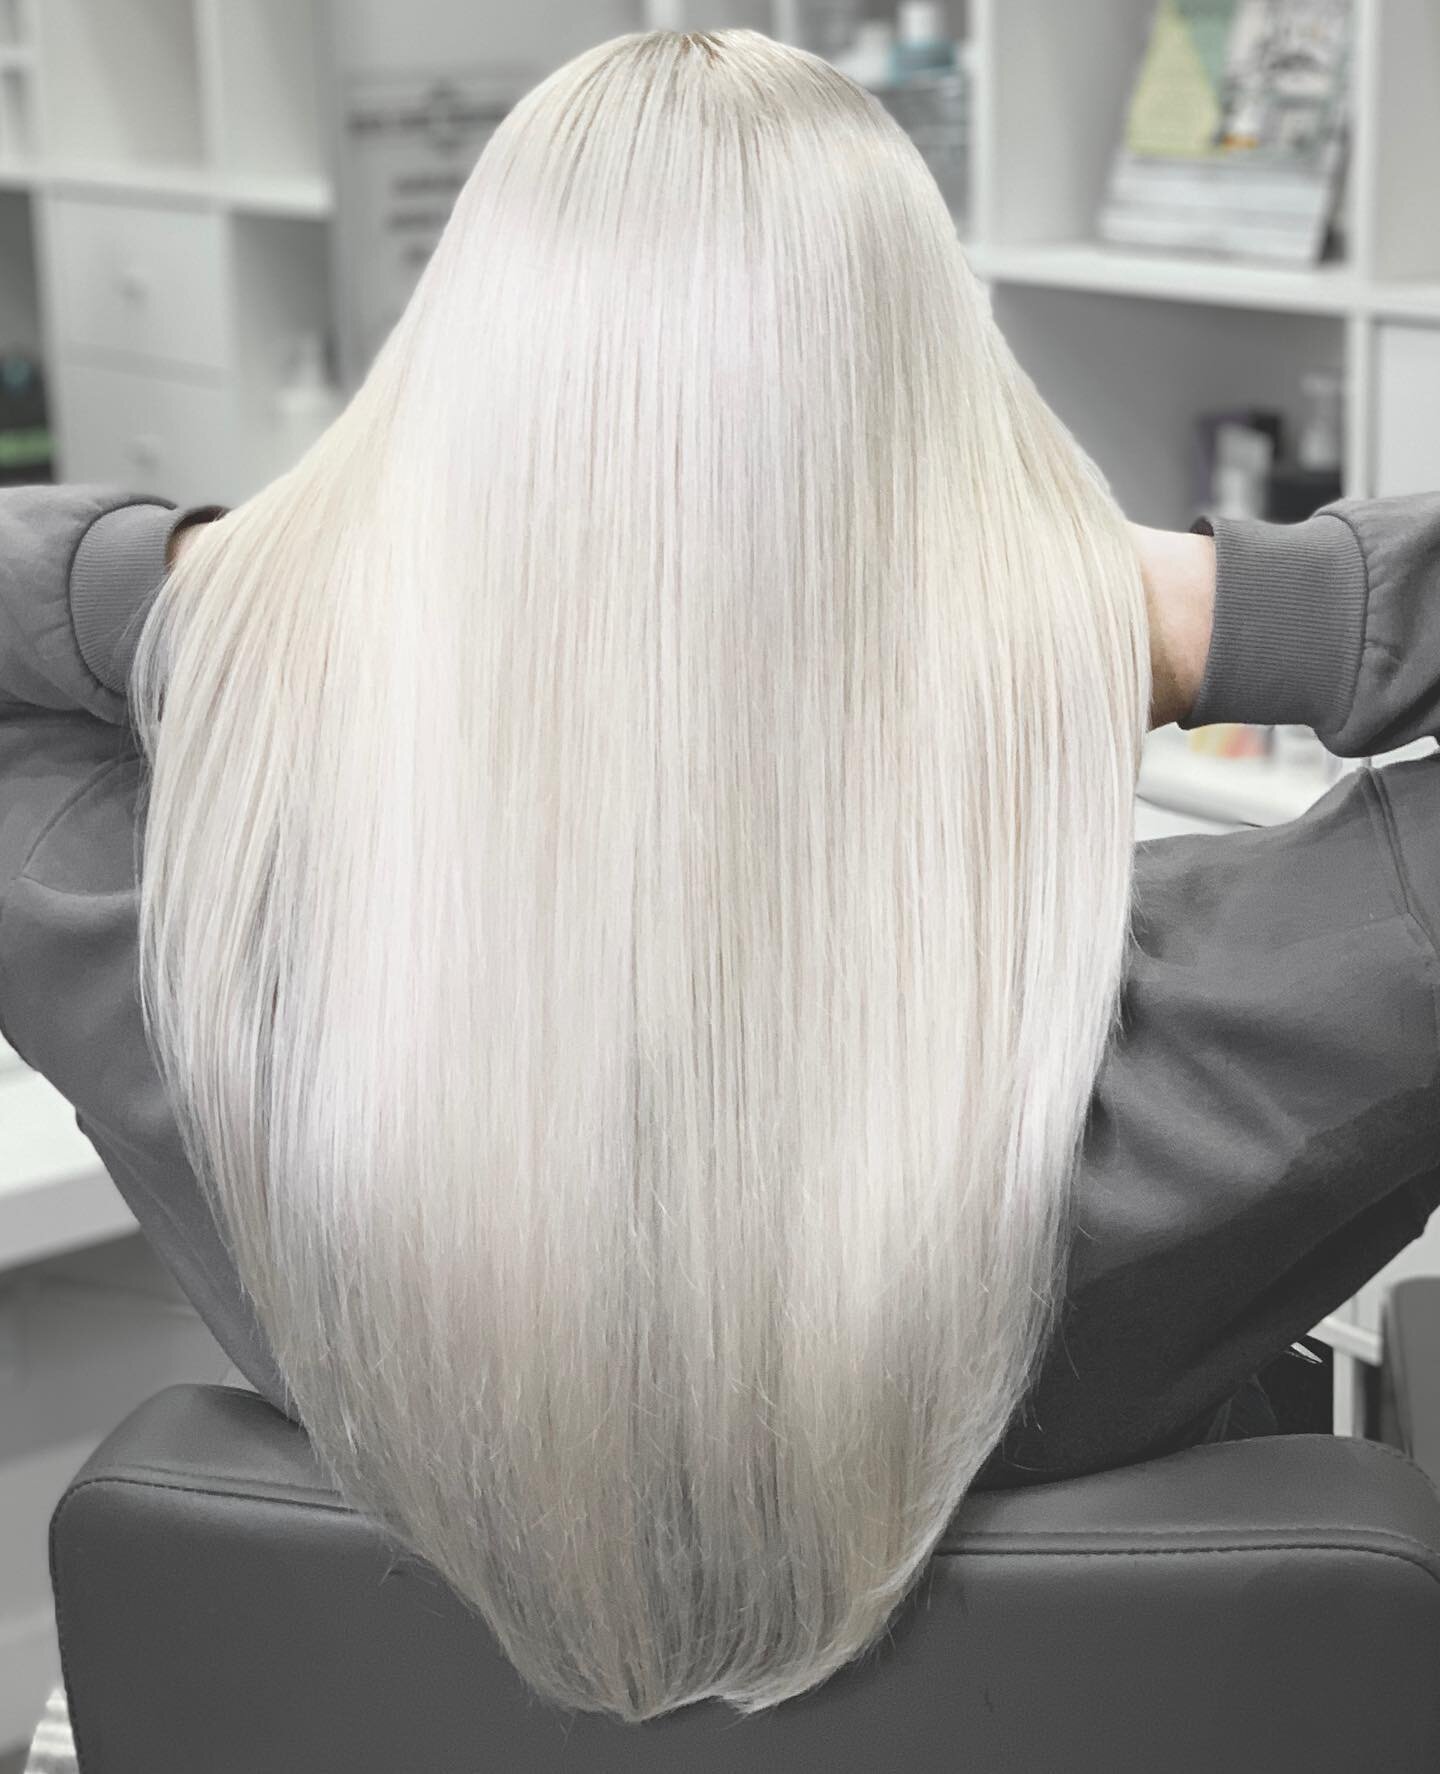 Revive by Andy Lam #bayalage #ombrehair #oleplex #platinumblonde #instahair #hairgoals #stylist #highlights #hairsalon #hairstylist #hairbyme #haircolorist #hairartist #cutandcolor #colorexpert #colorcorrection #behindthechair #astoria #astoriavibes 